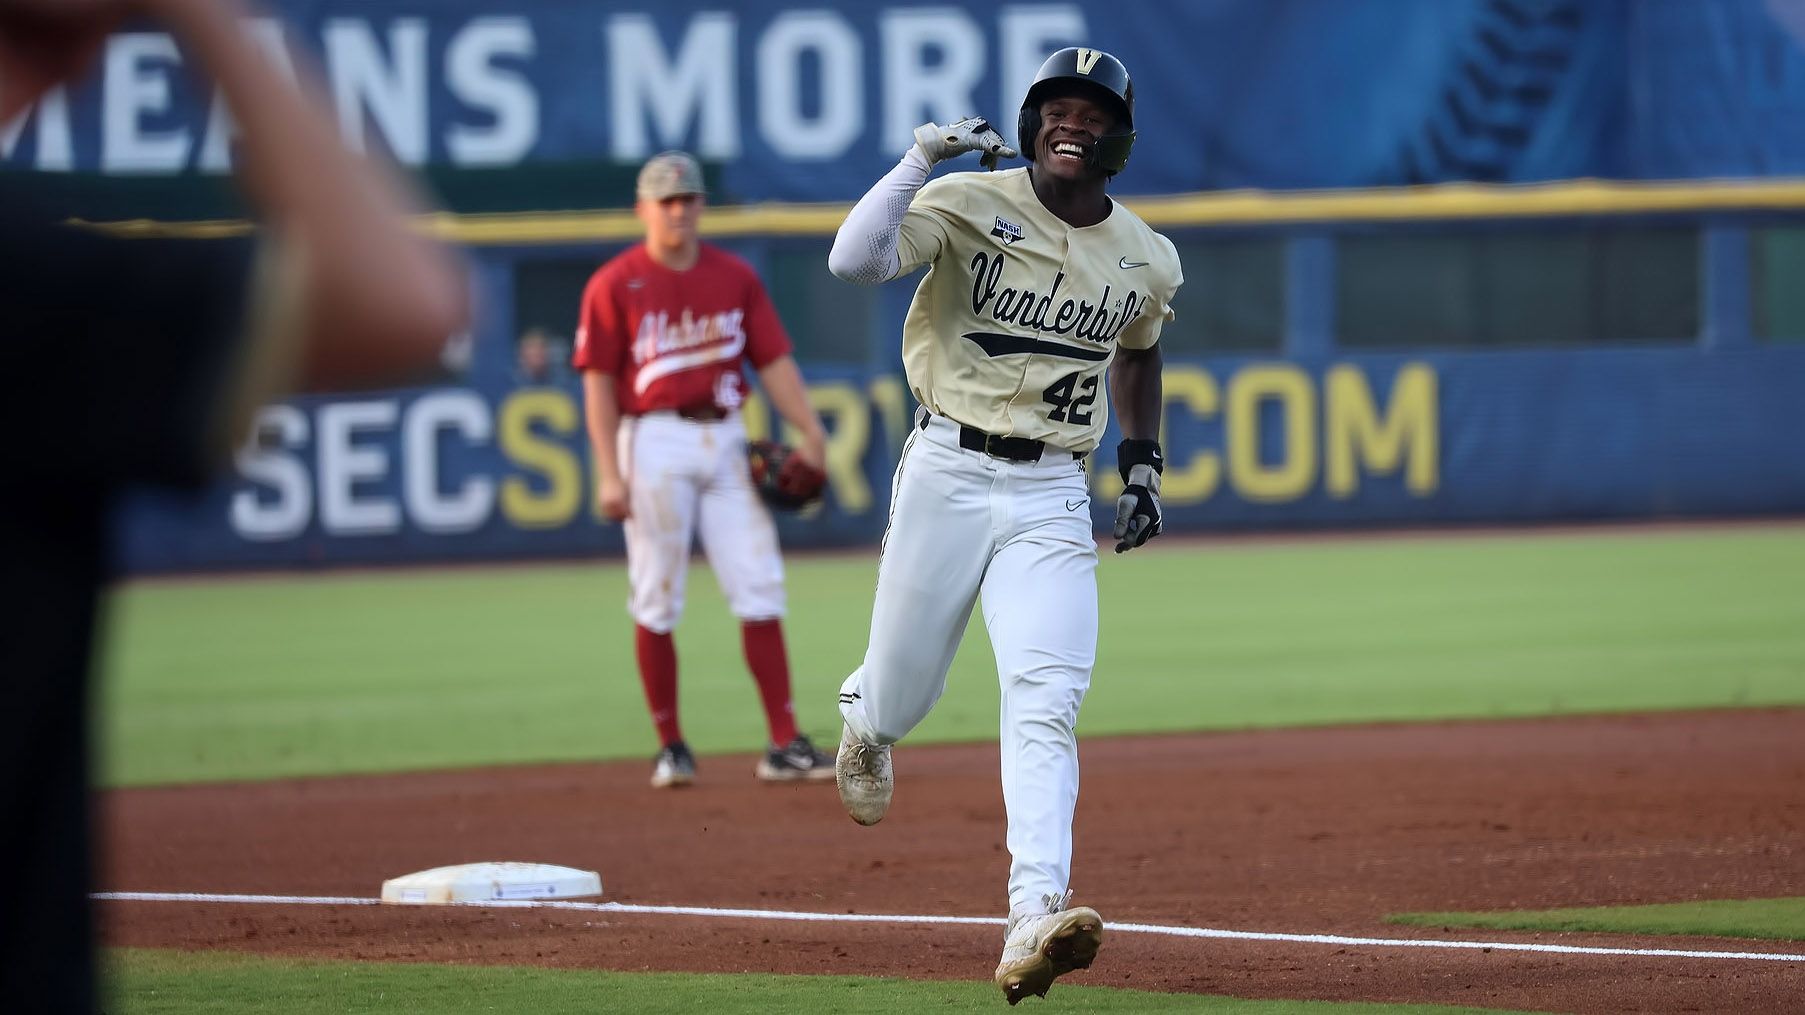 4-seed Vandy's five-run frame knocks out 9-seed Bama